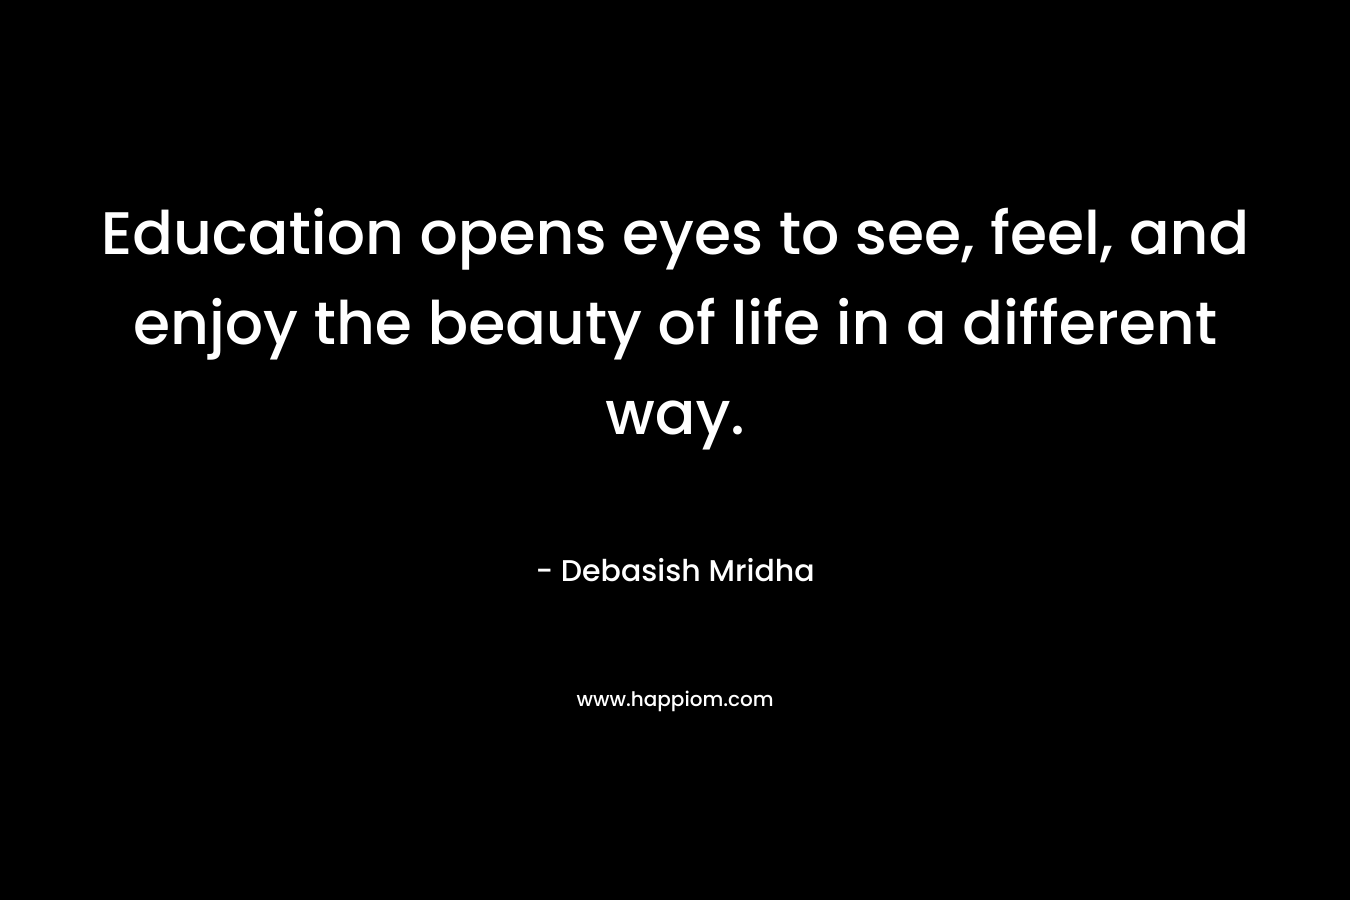 Education opens eyes to see, feel, and enjoy the beauty of life in a different way.